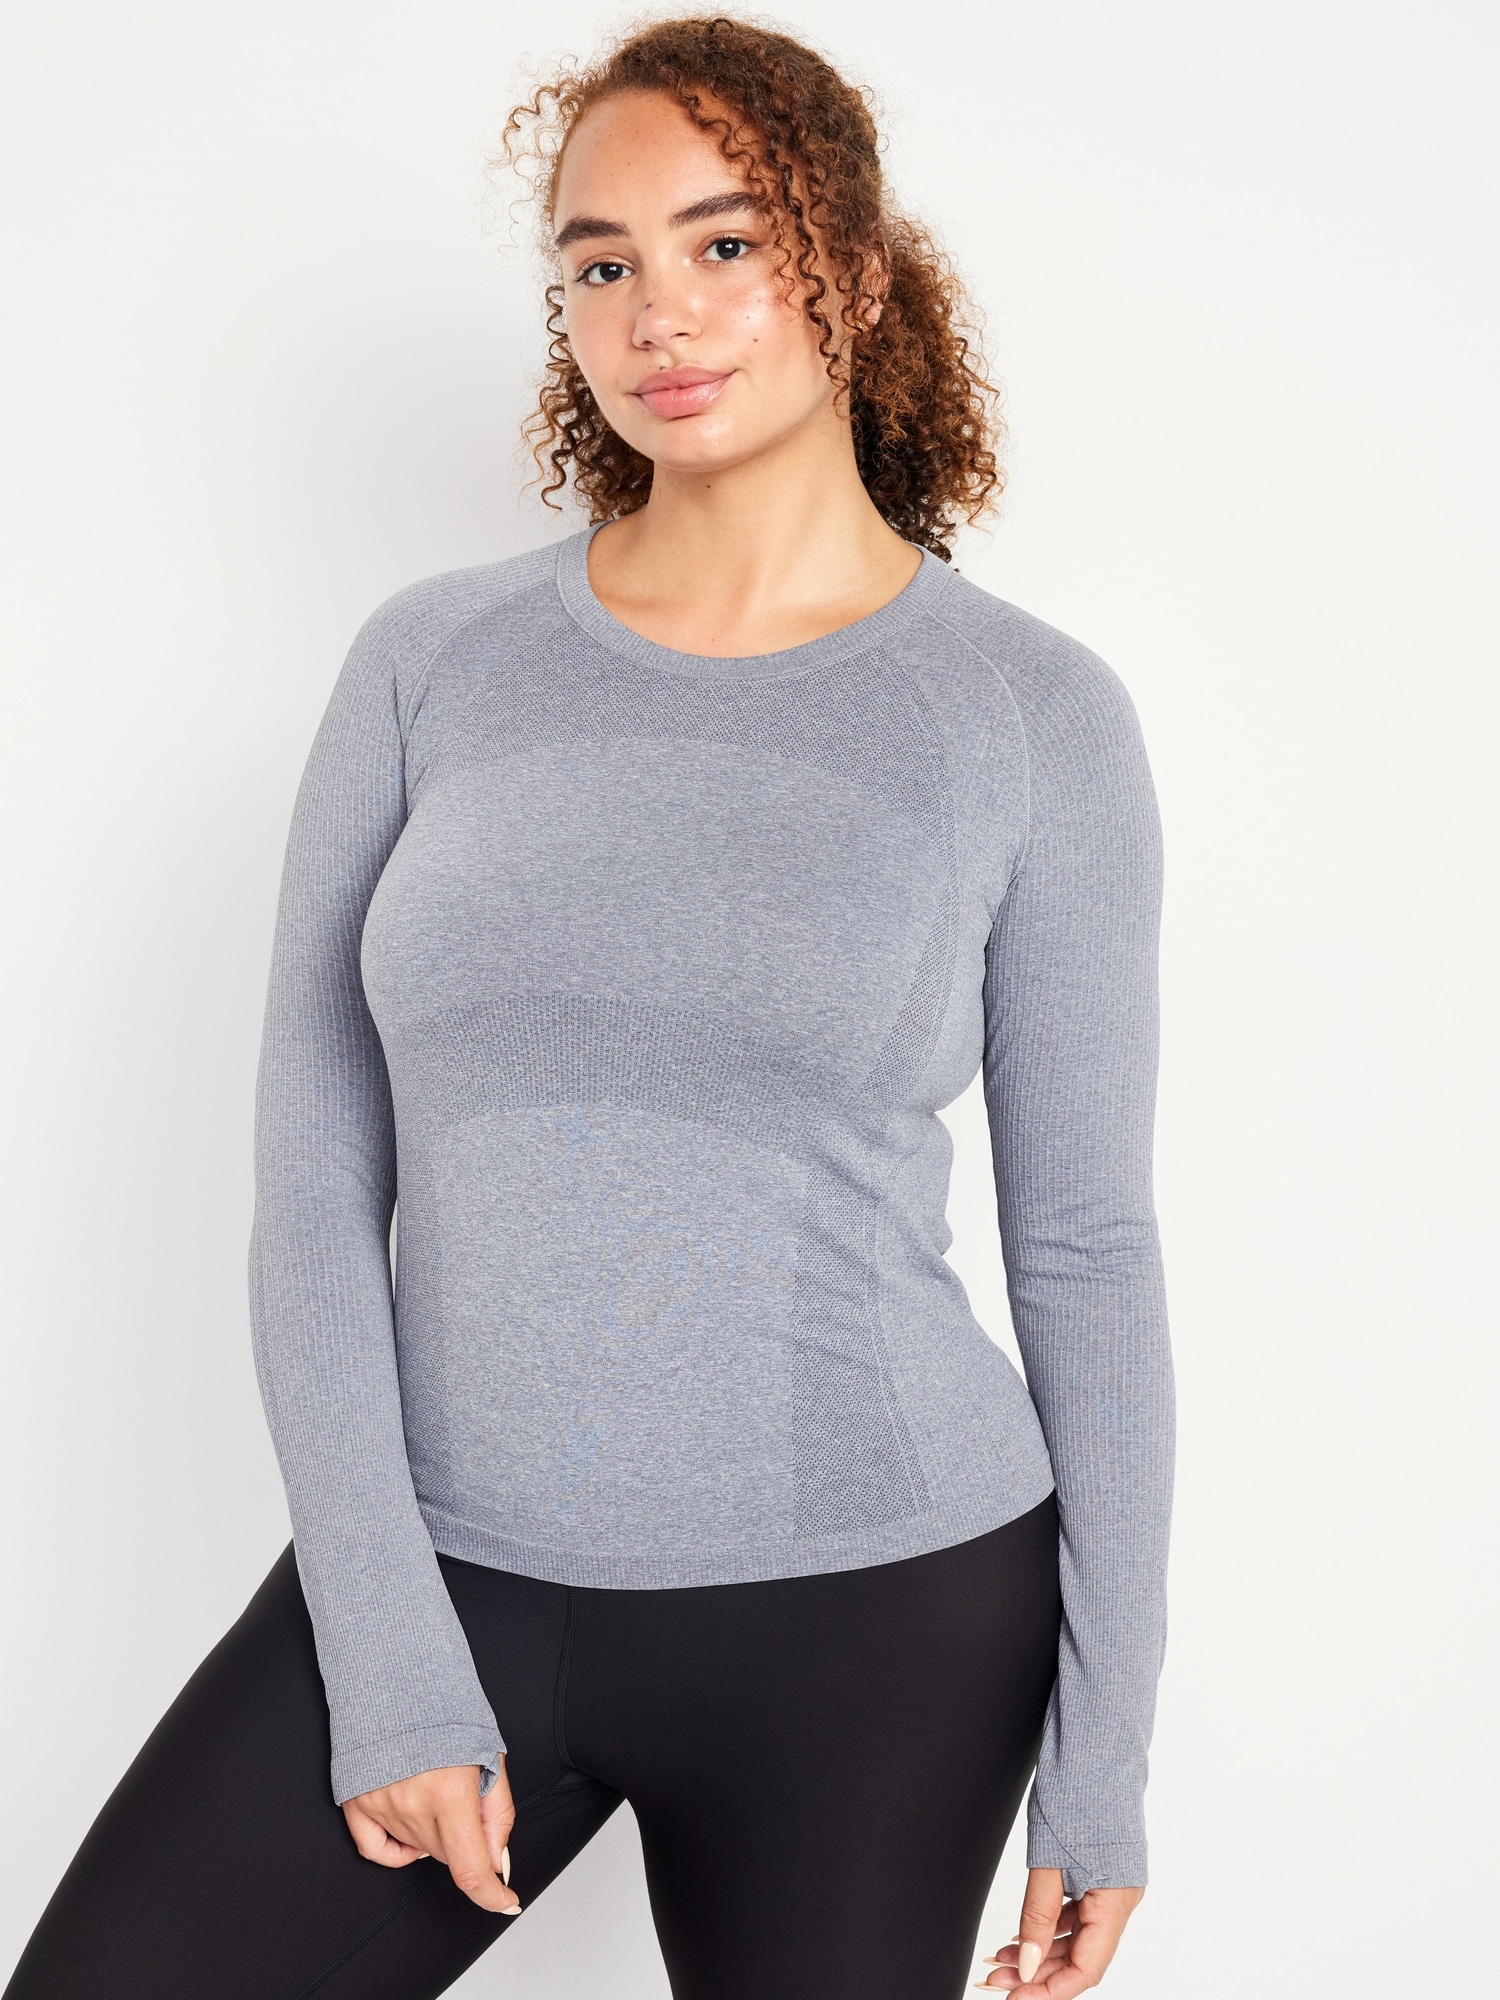 Long-Sleeve Seamless Performance Top | Old Navy